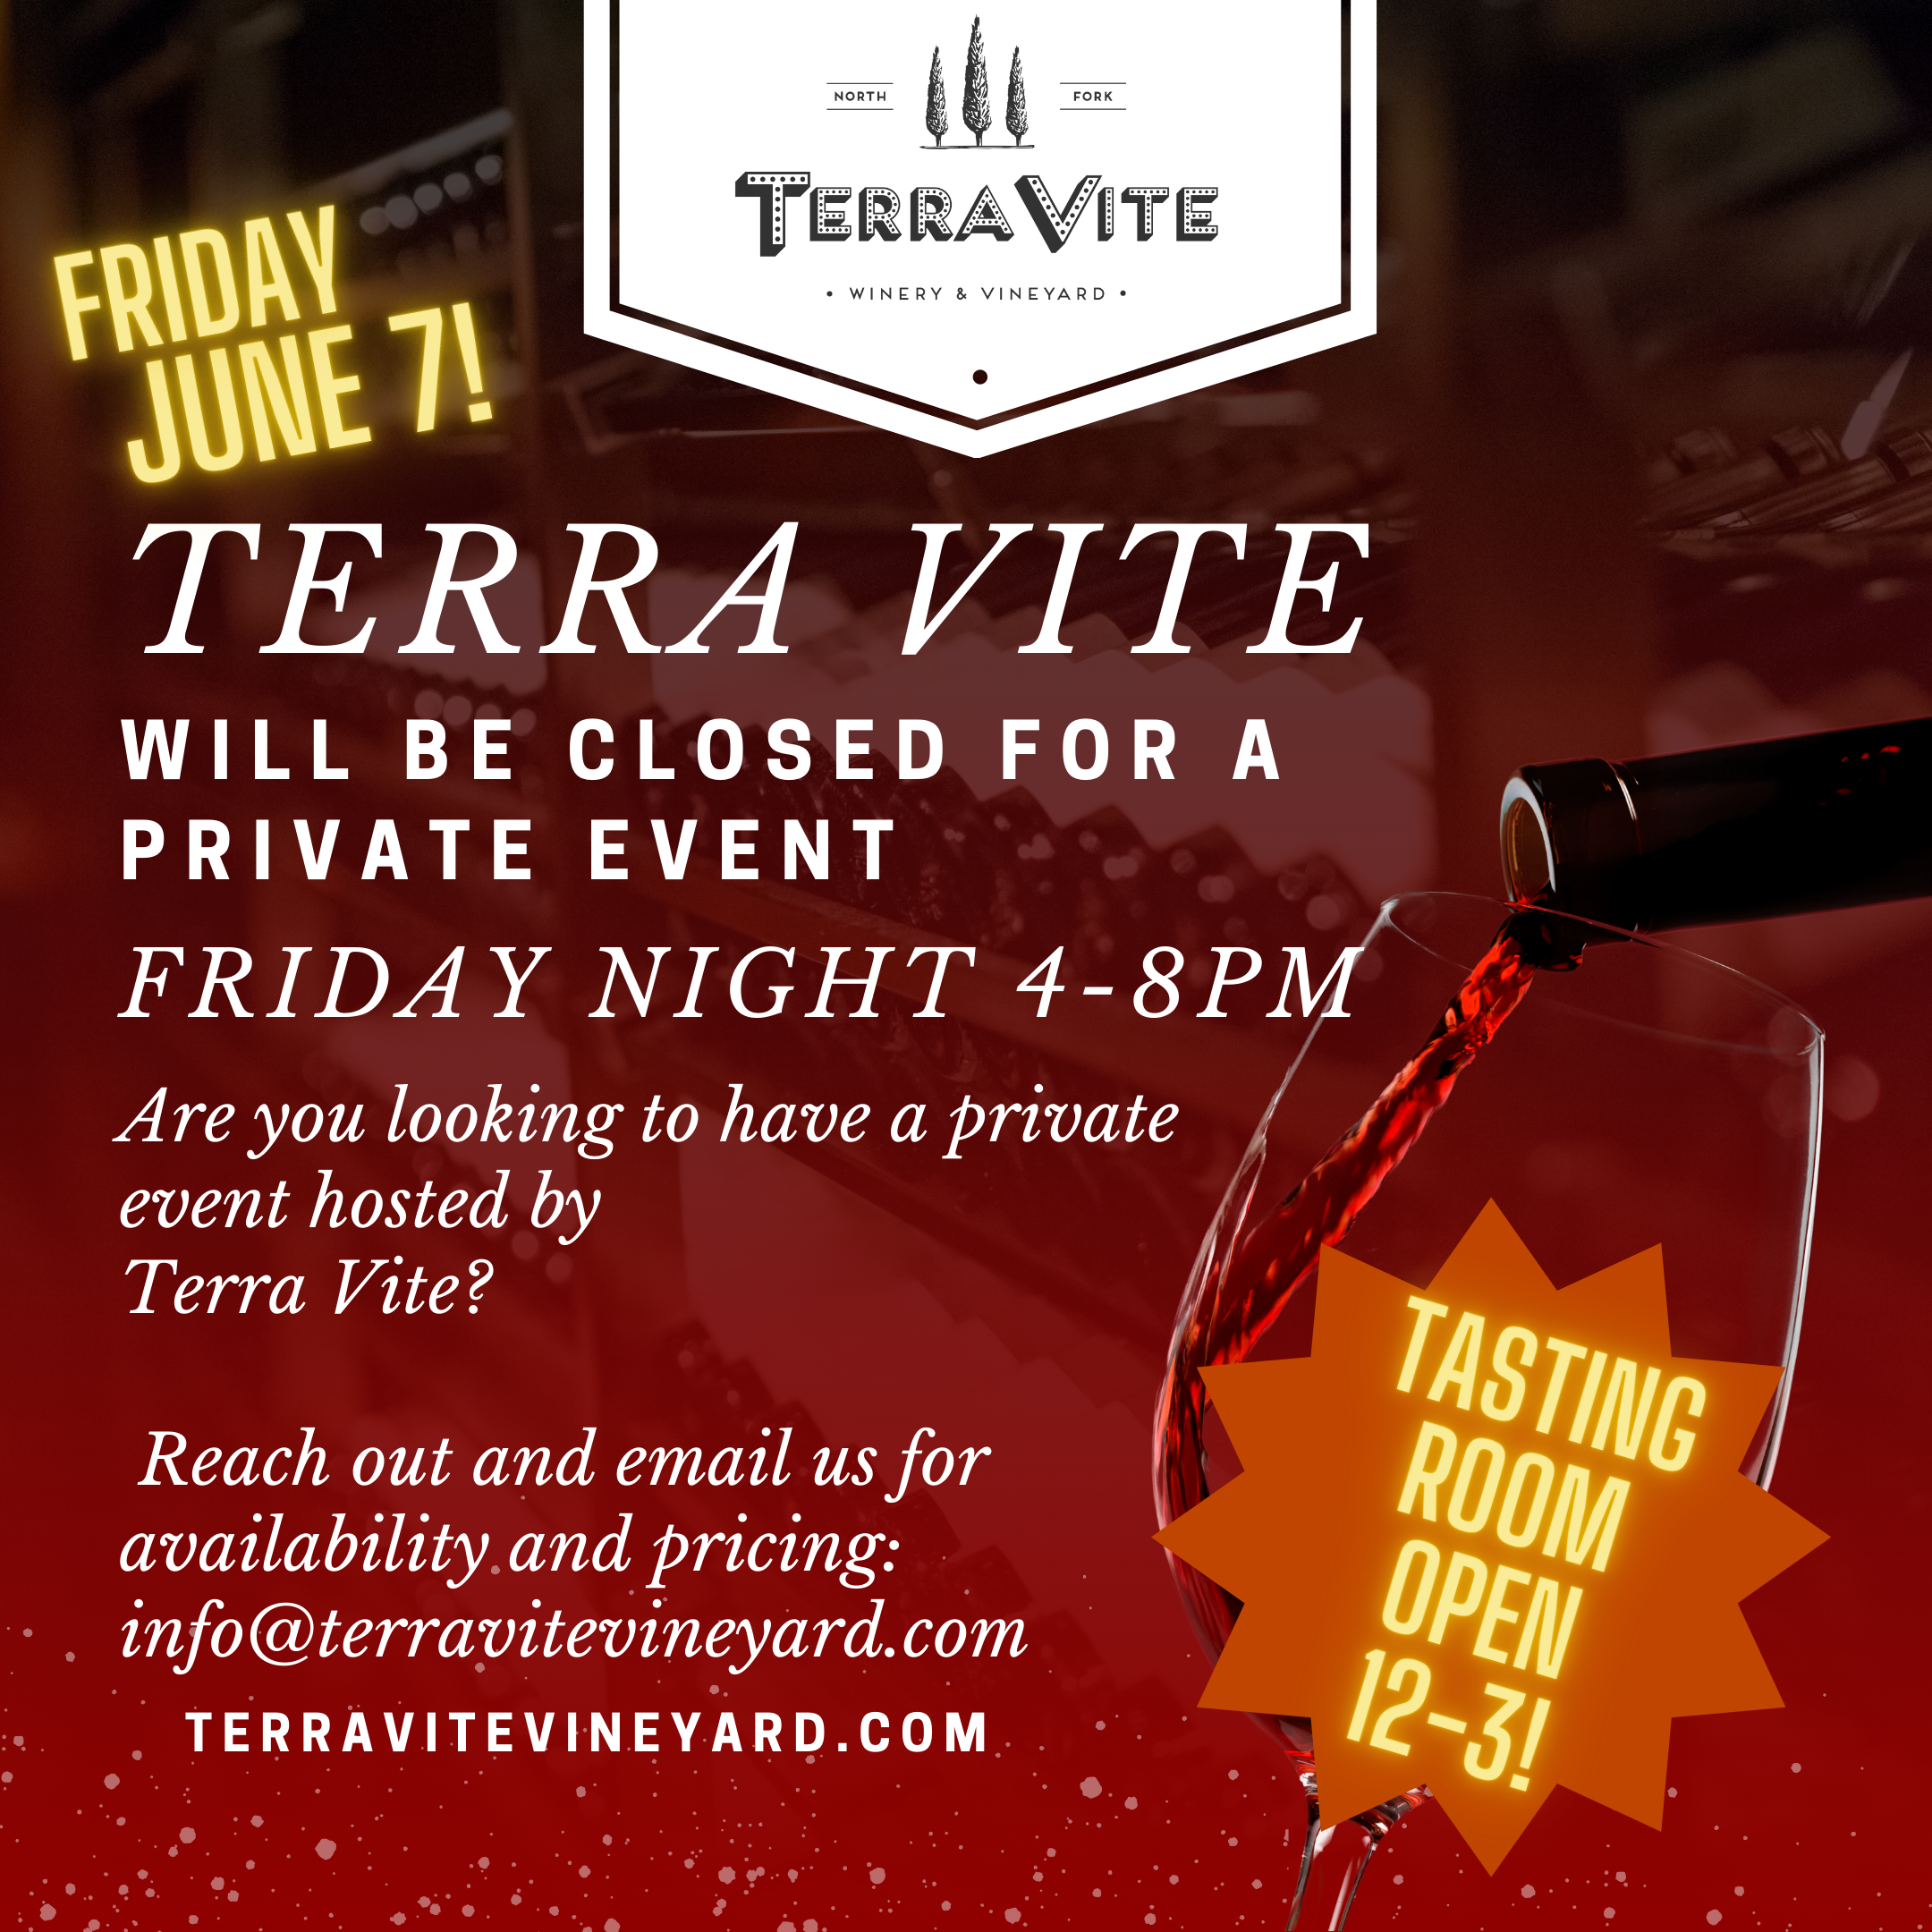 Terra Vite will be closed for a Private Event the evening of June 7th from 4pm-8pm.